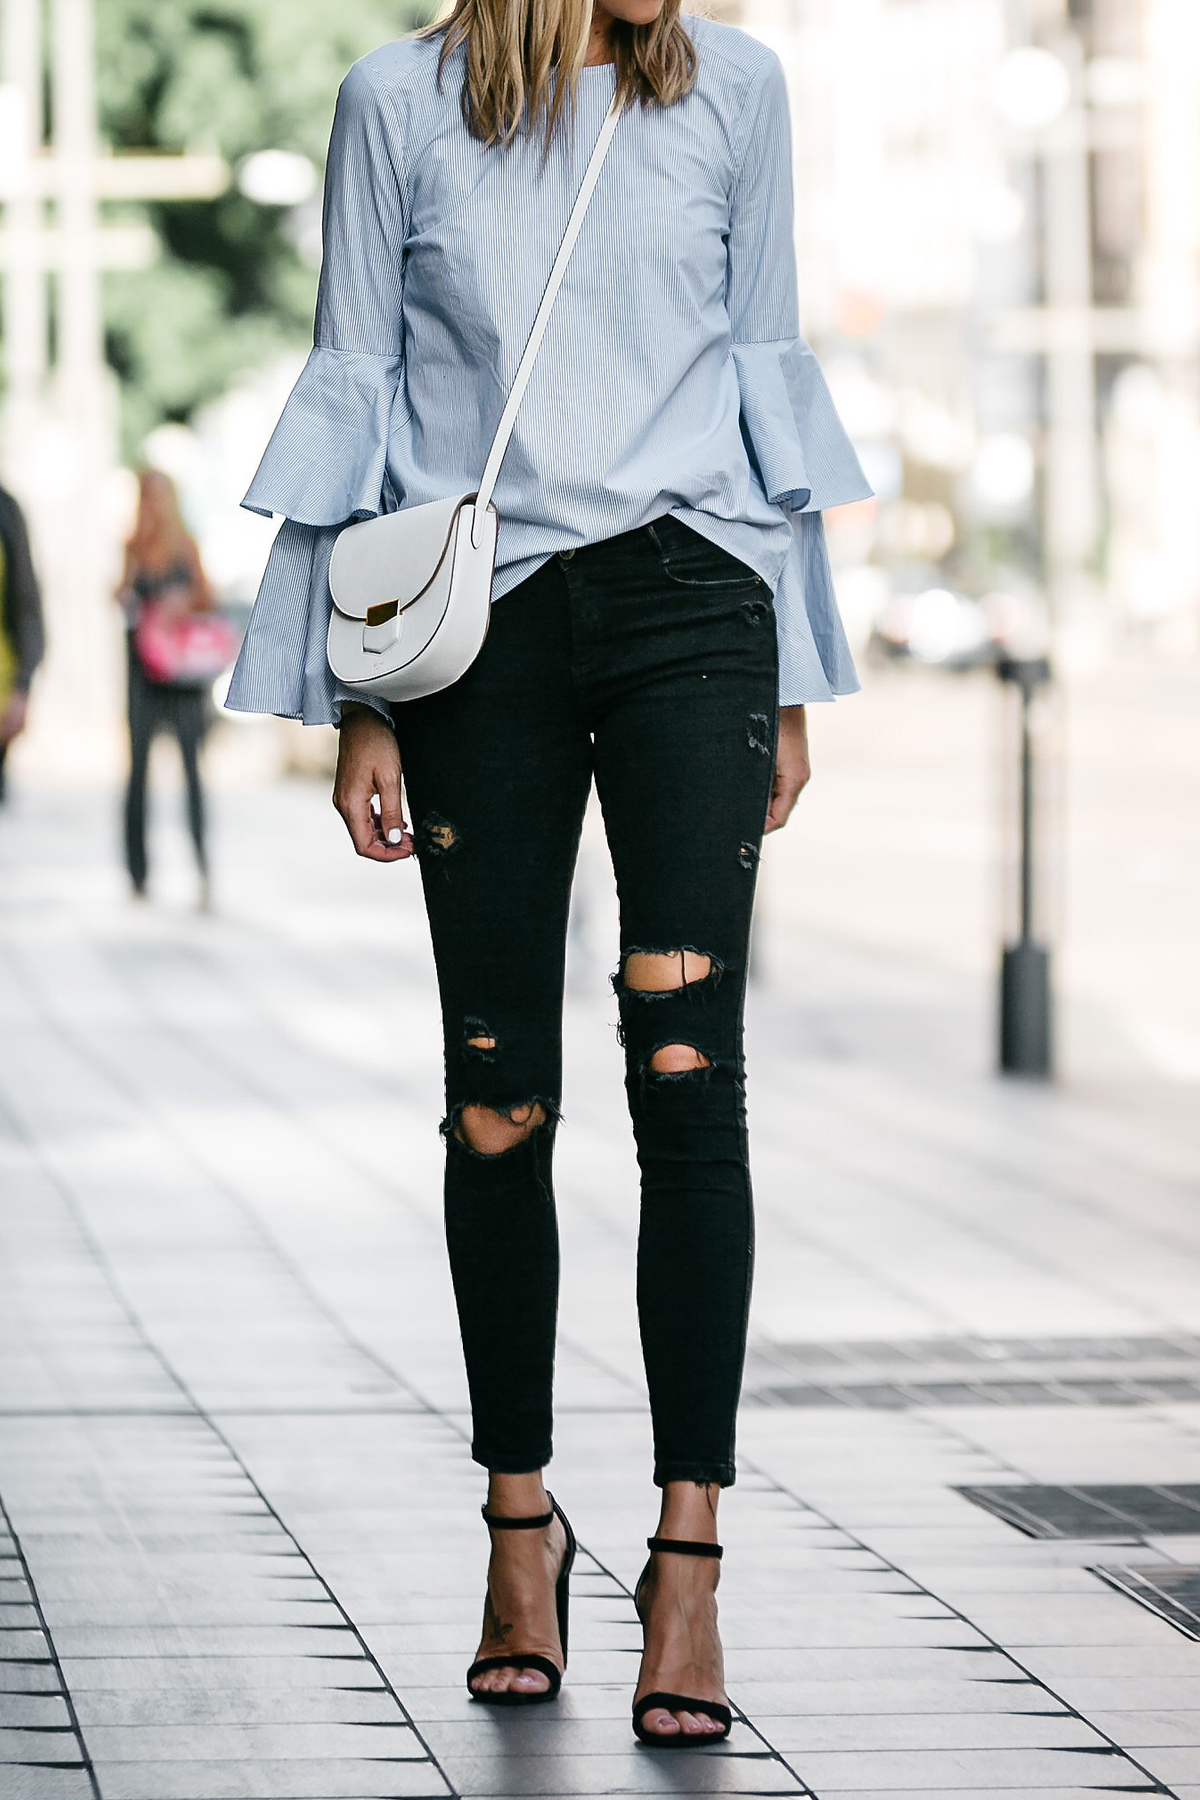 Nordstrom Blue Bell Sleeve Top Black Ripped Skinny Jeans Outfit Celine Trotteur White Crossbody Fashion Jackson Dallas Blogger Fashion Blogger Street Style